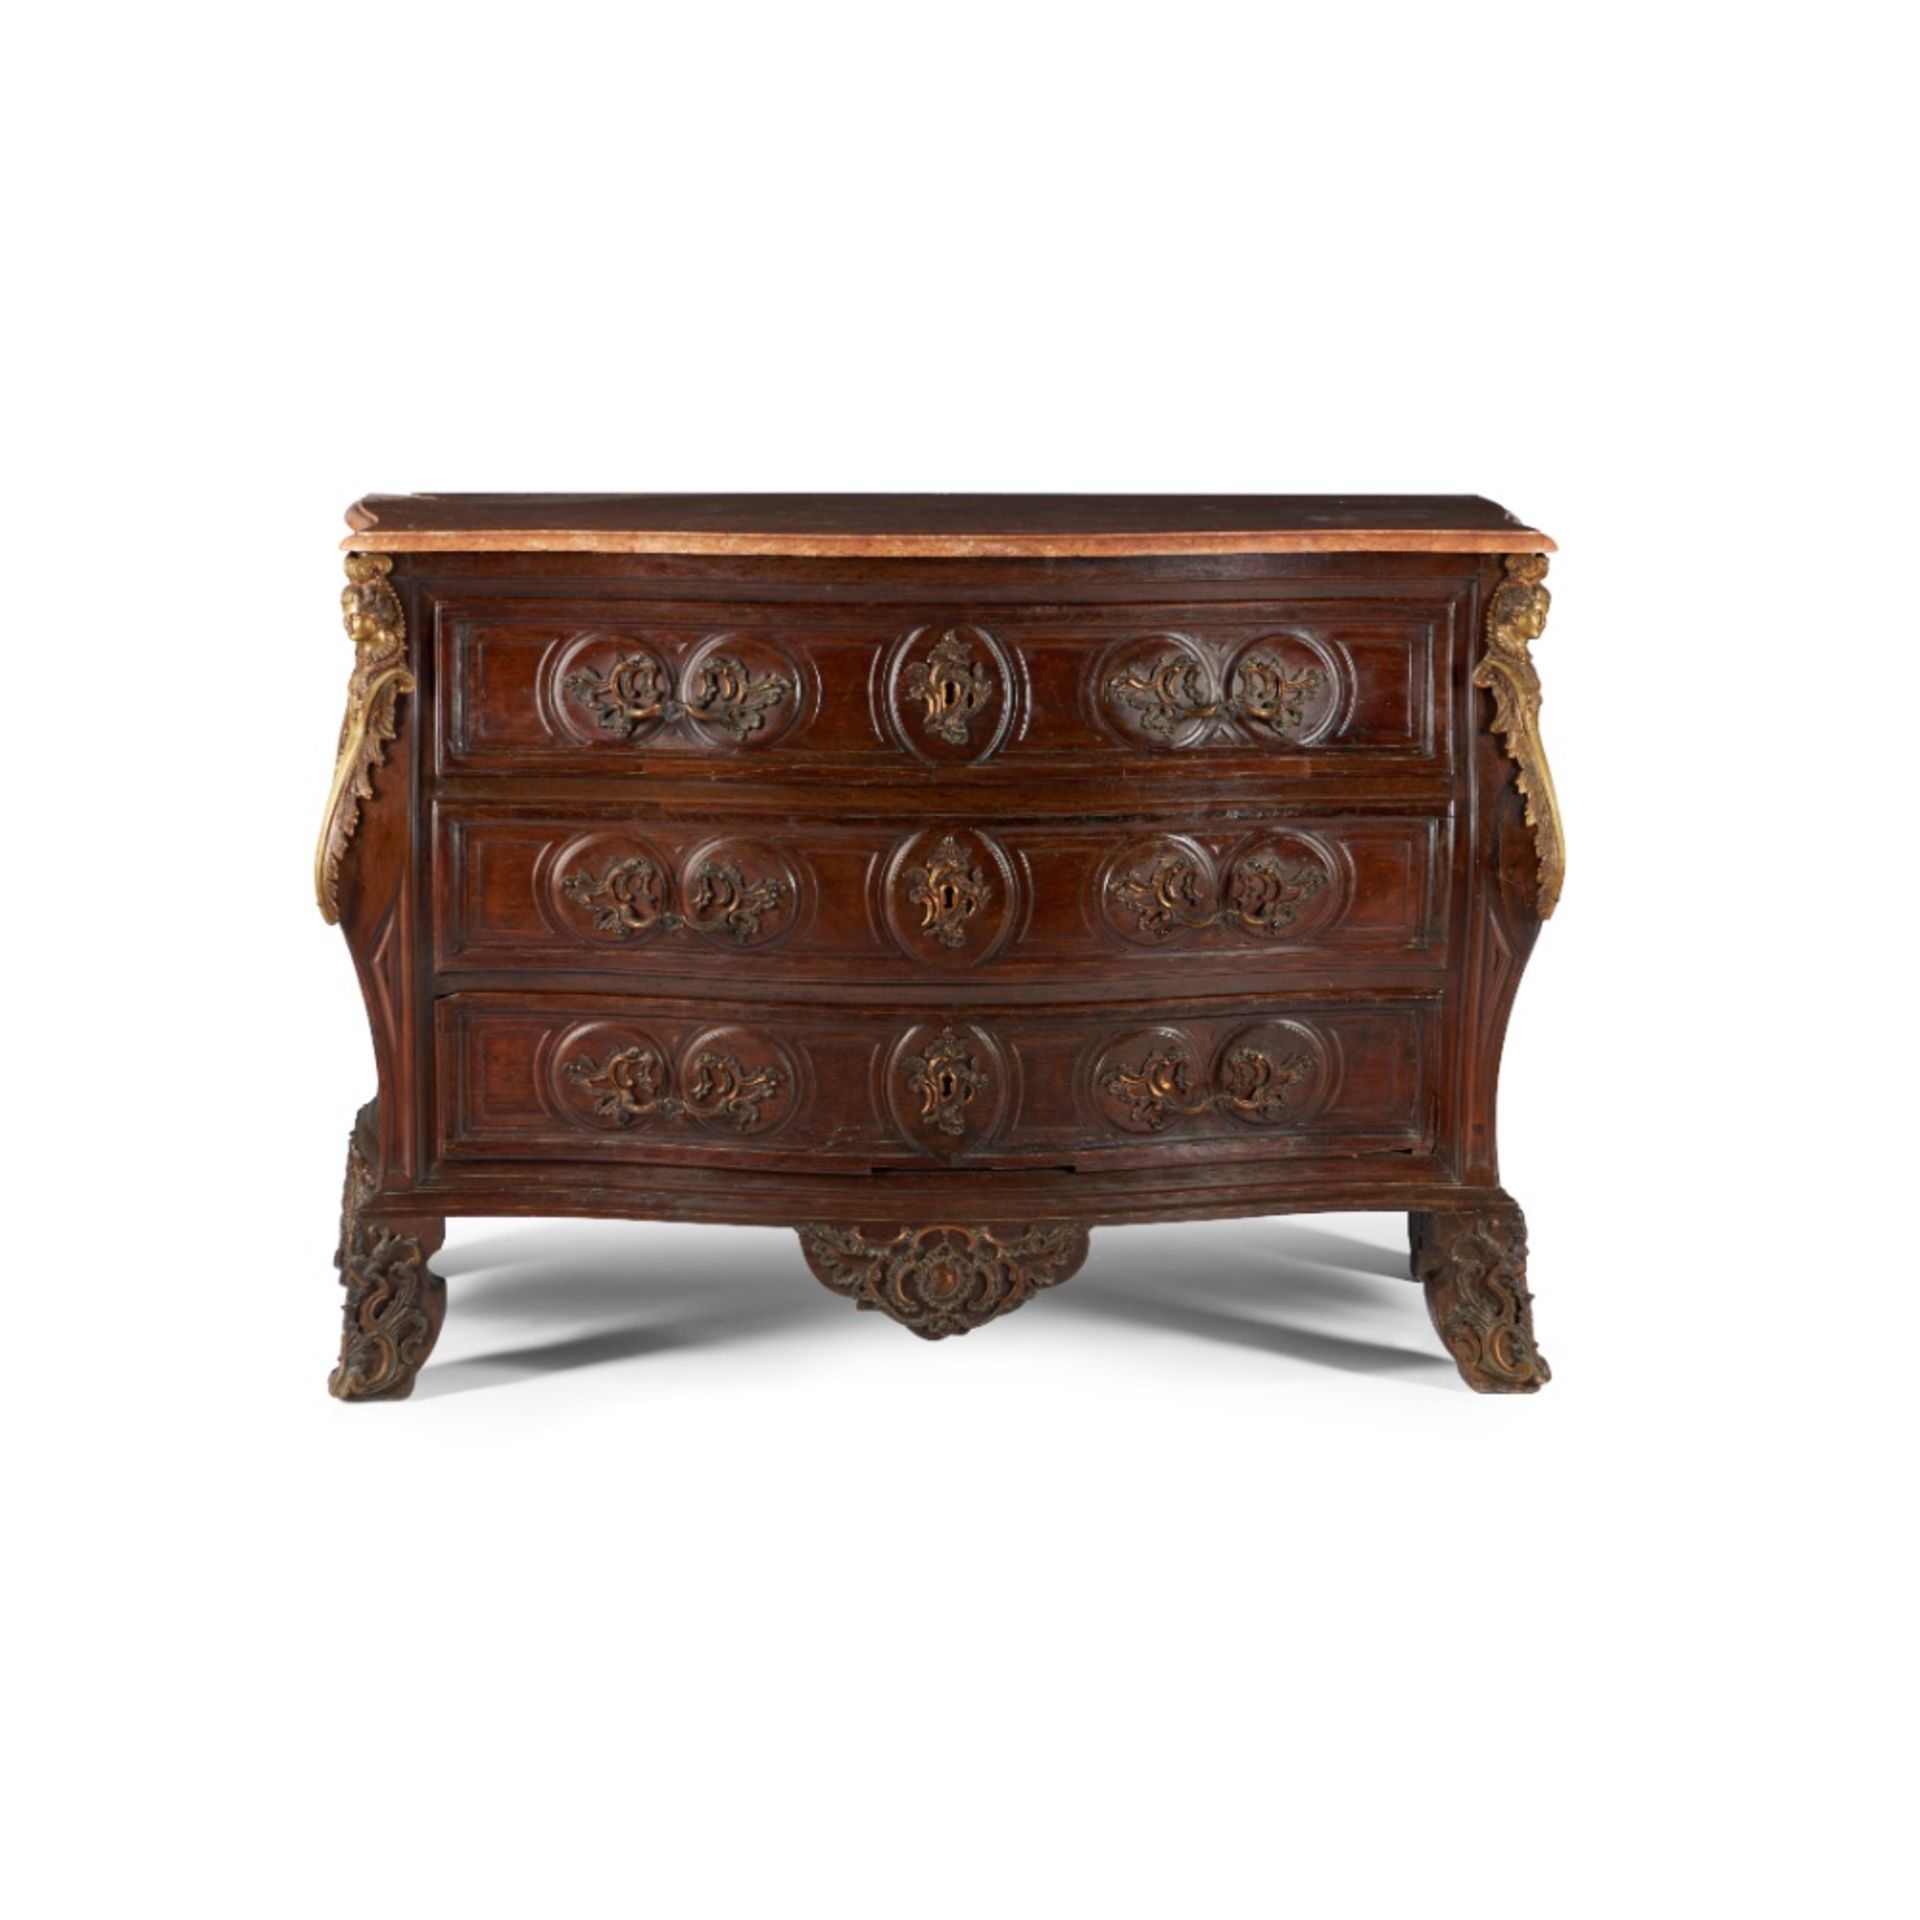 A French Regency style chest of drawers - Image 2 of 2